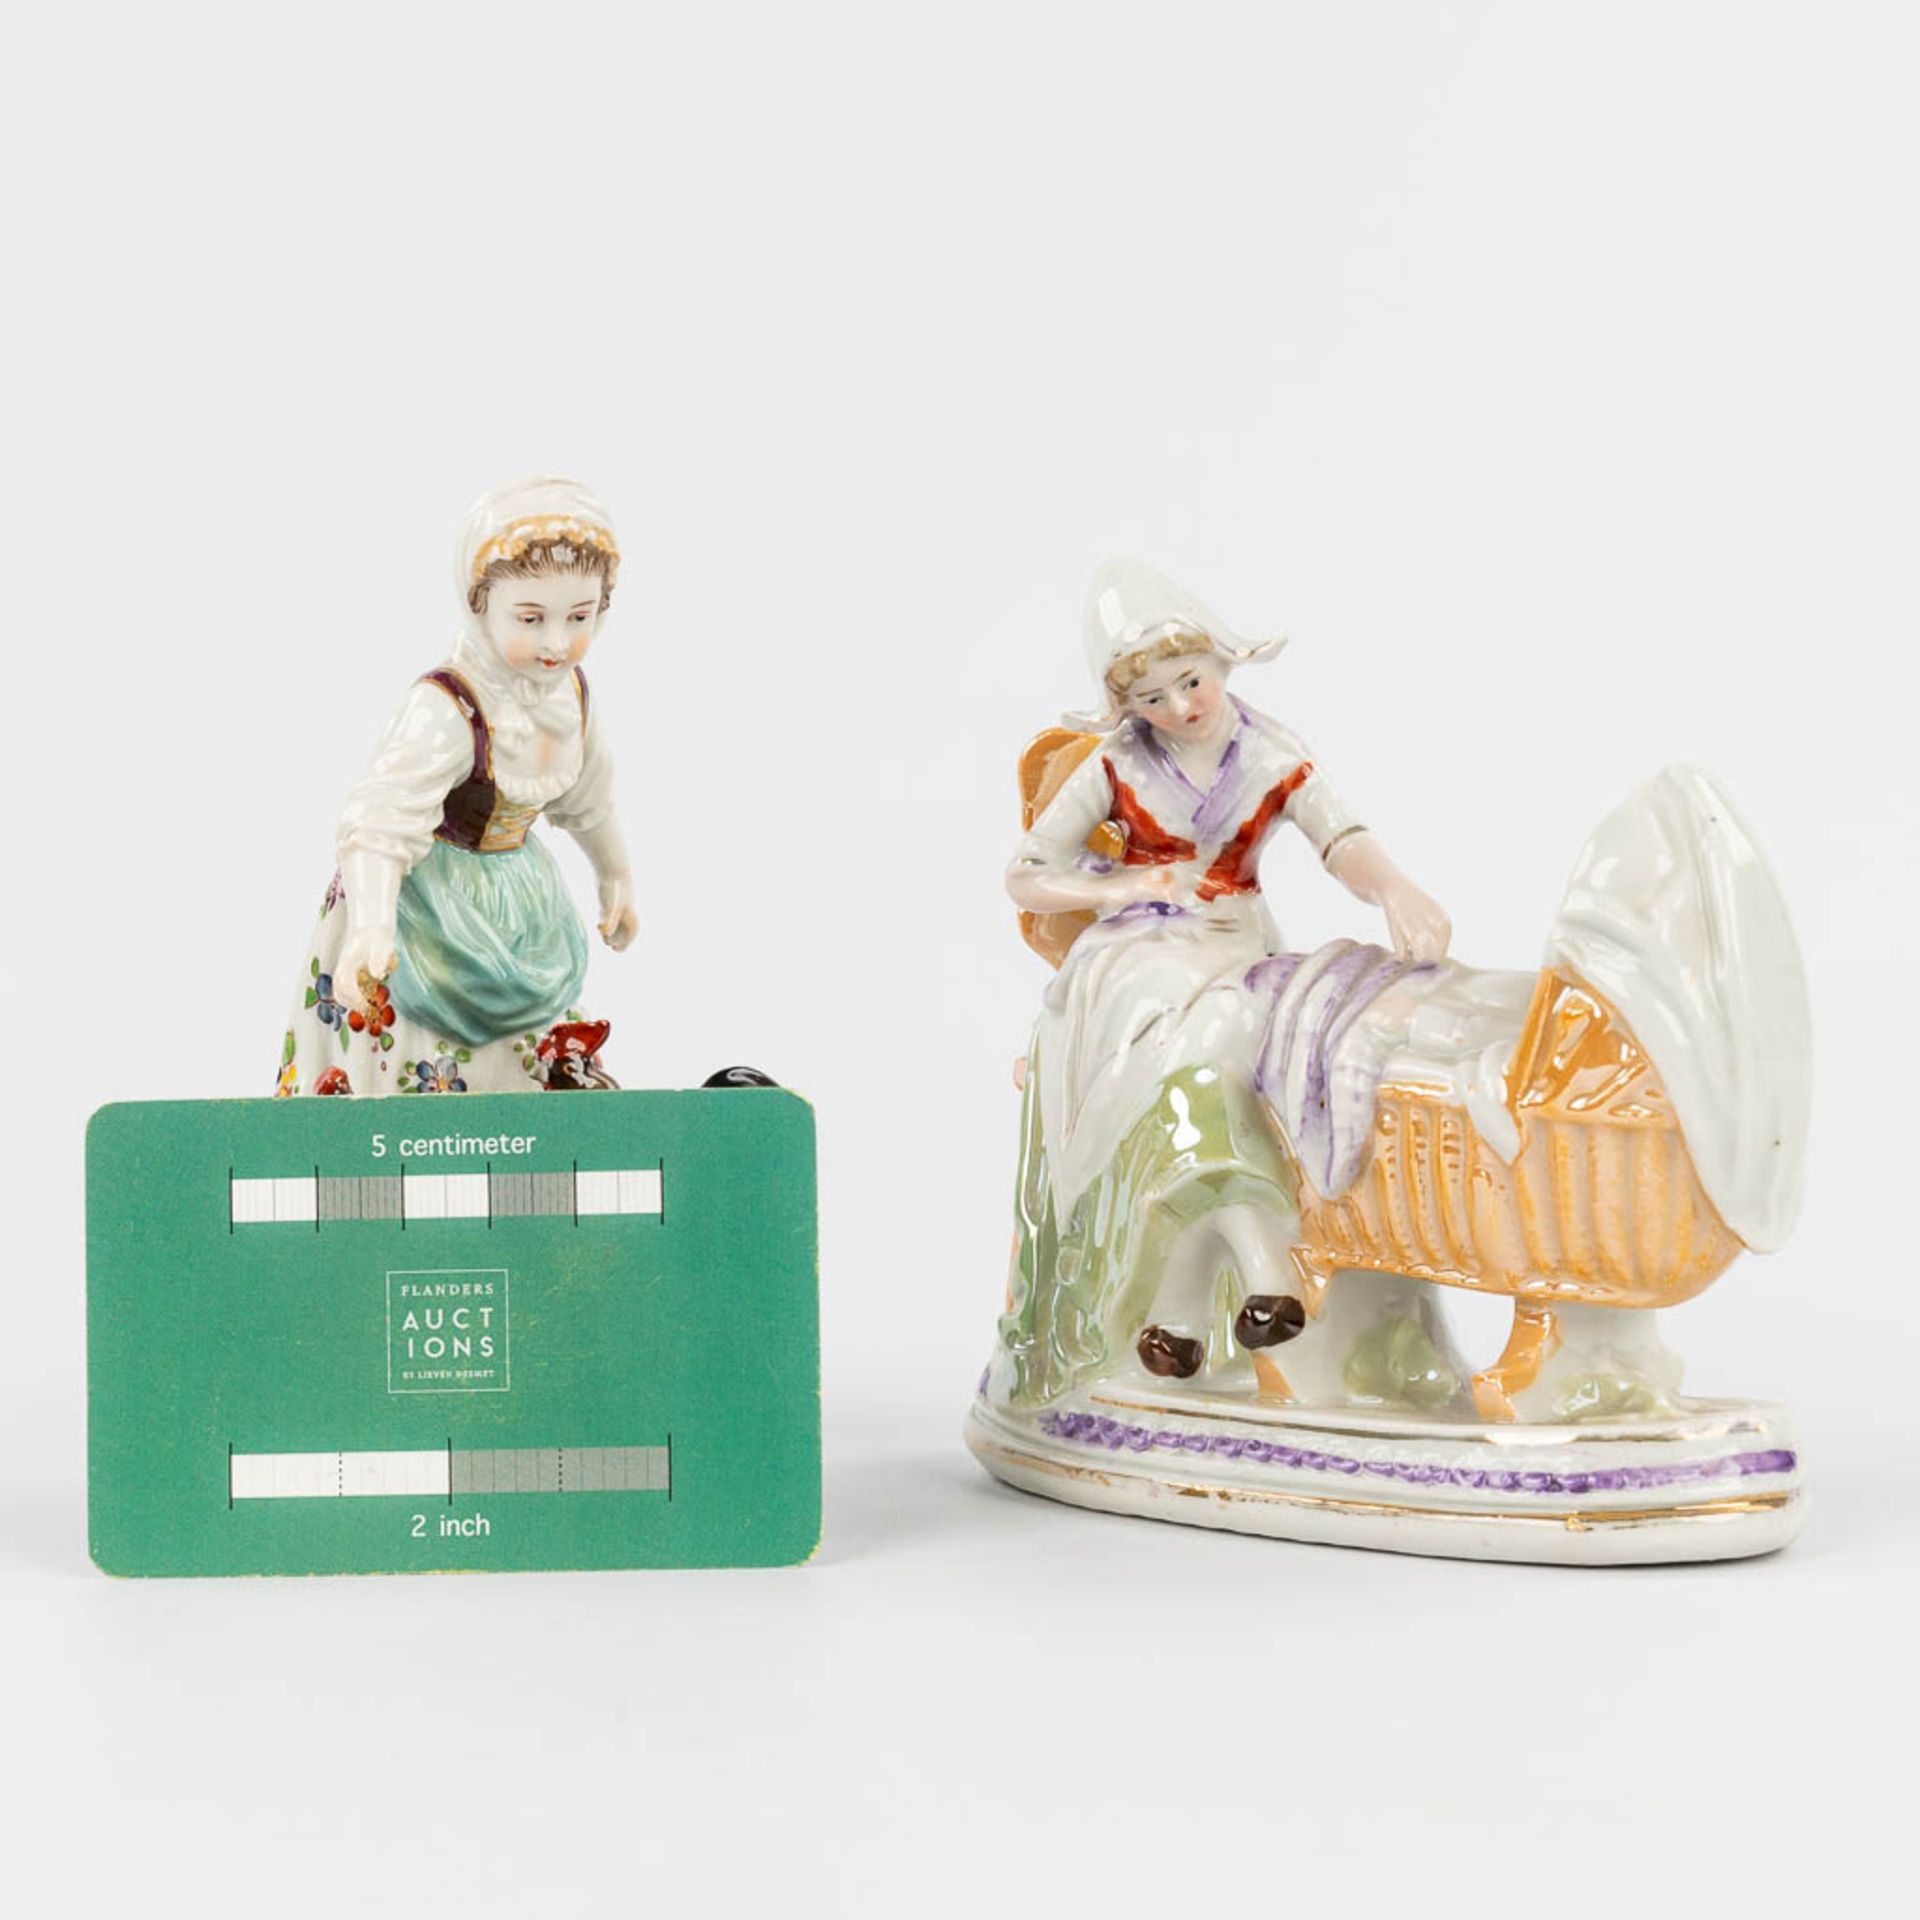 Volkstedt, a collection of 2 figurines made of porcelain in Germany. (H:13 cm) - Image 9 of 14